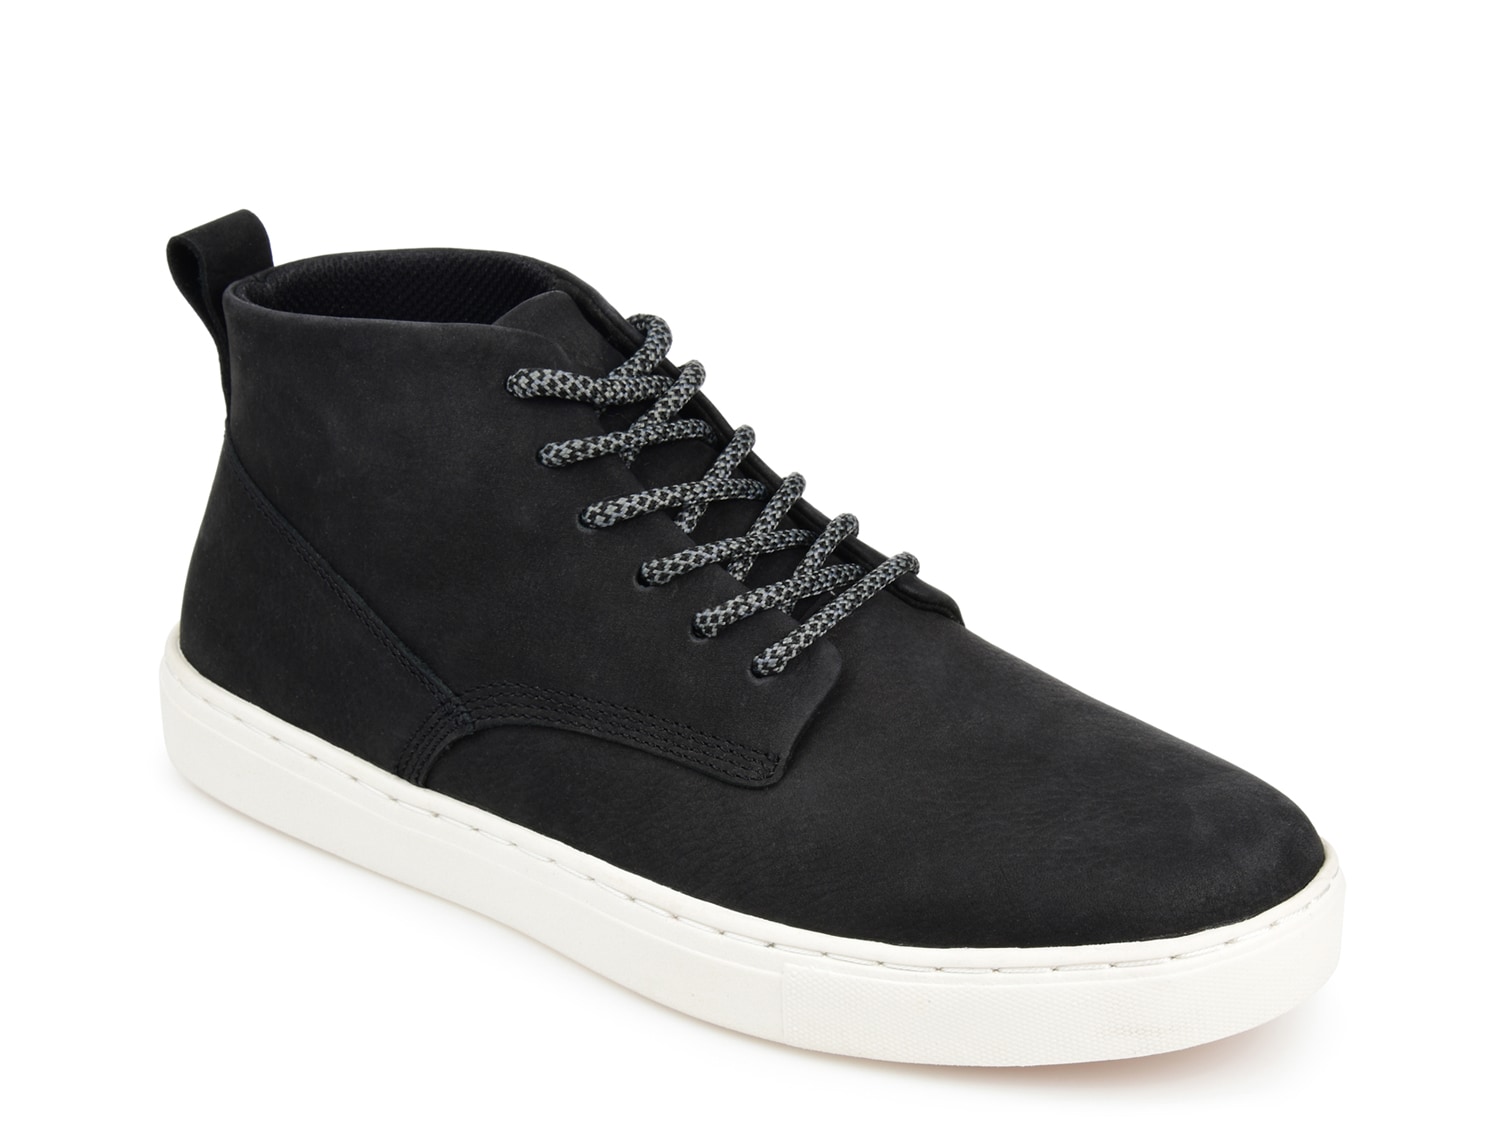 Territory Rove High Top Sneaker - Free Shipping | DSW